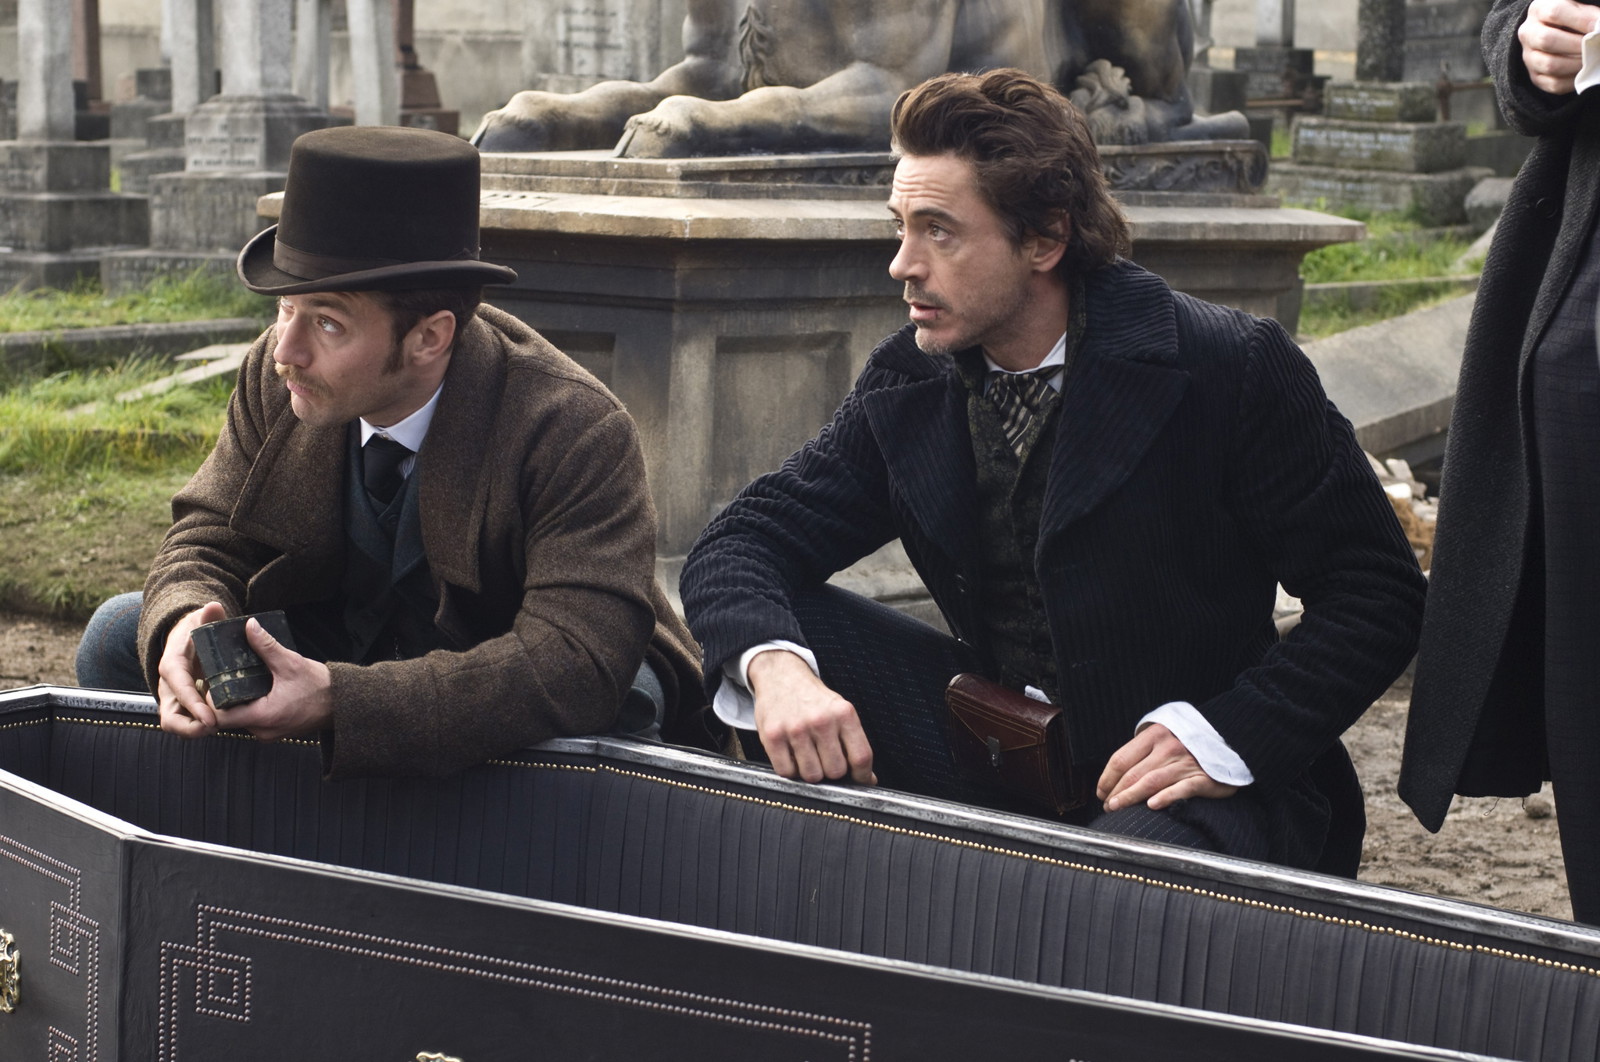 Robert downey Jr. and Jude Law in 2009's Sherlock Holmes | Warner Bros Pictures